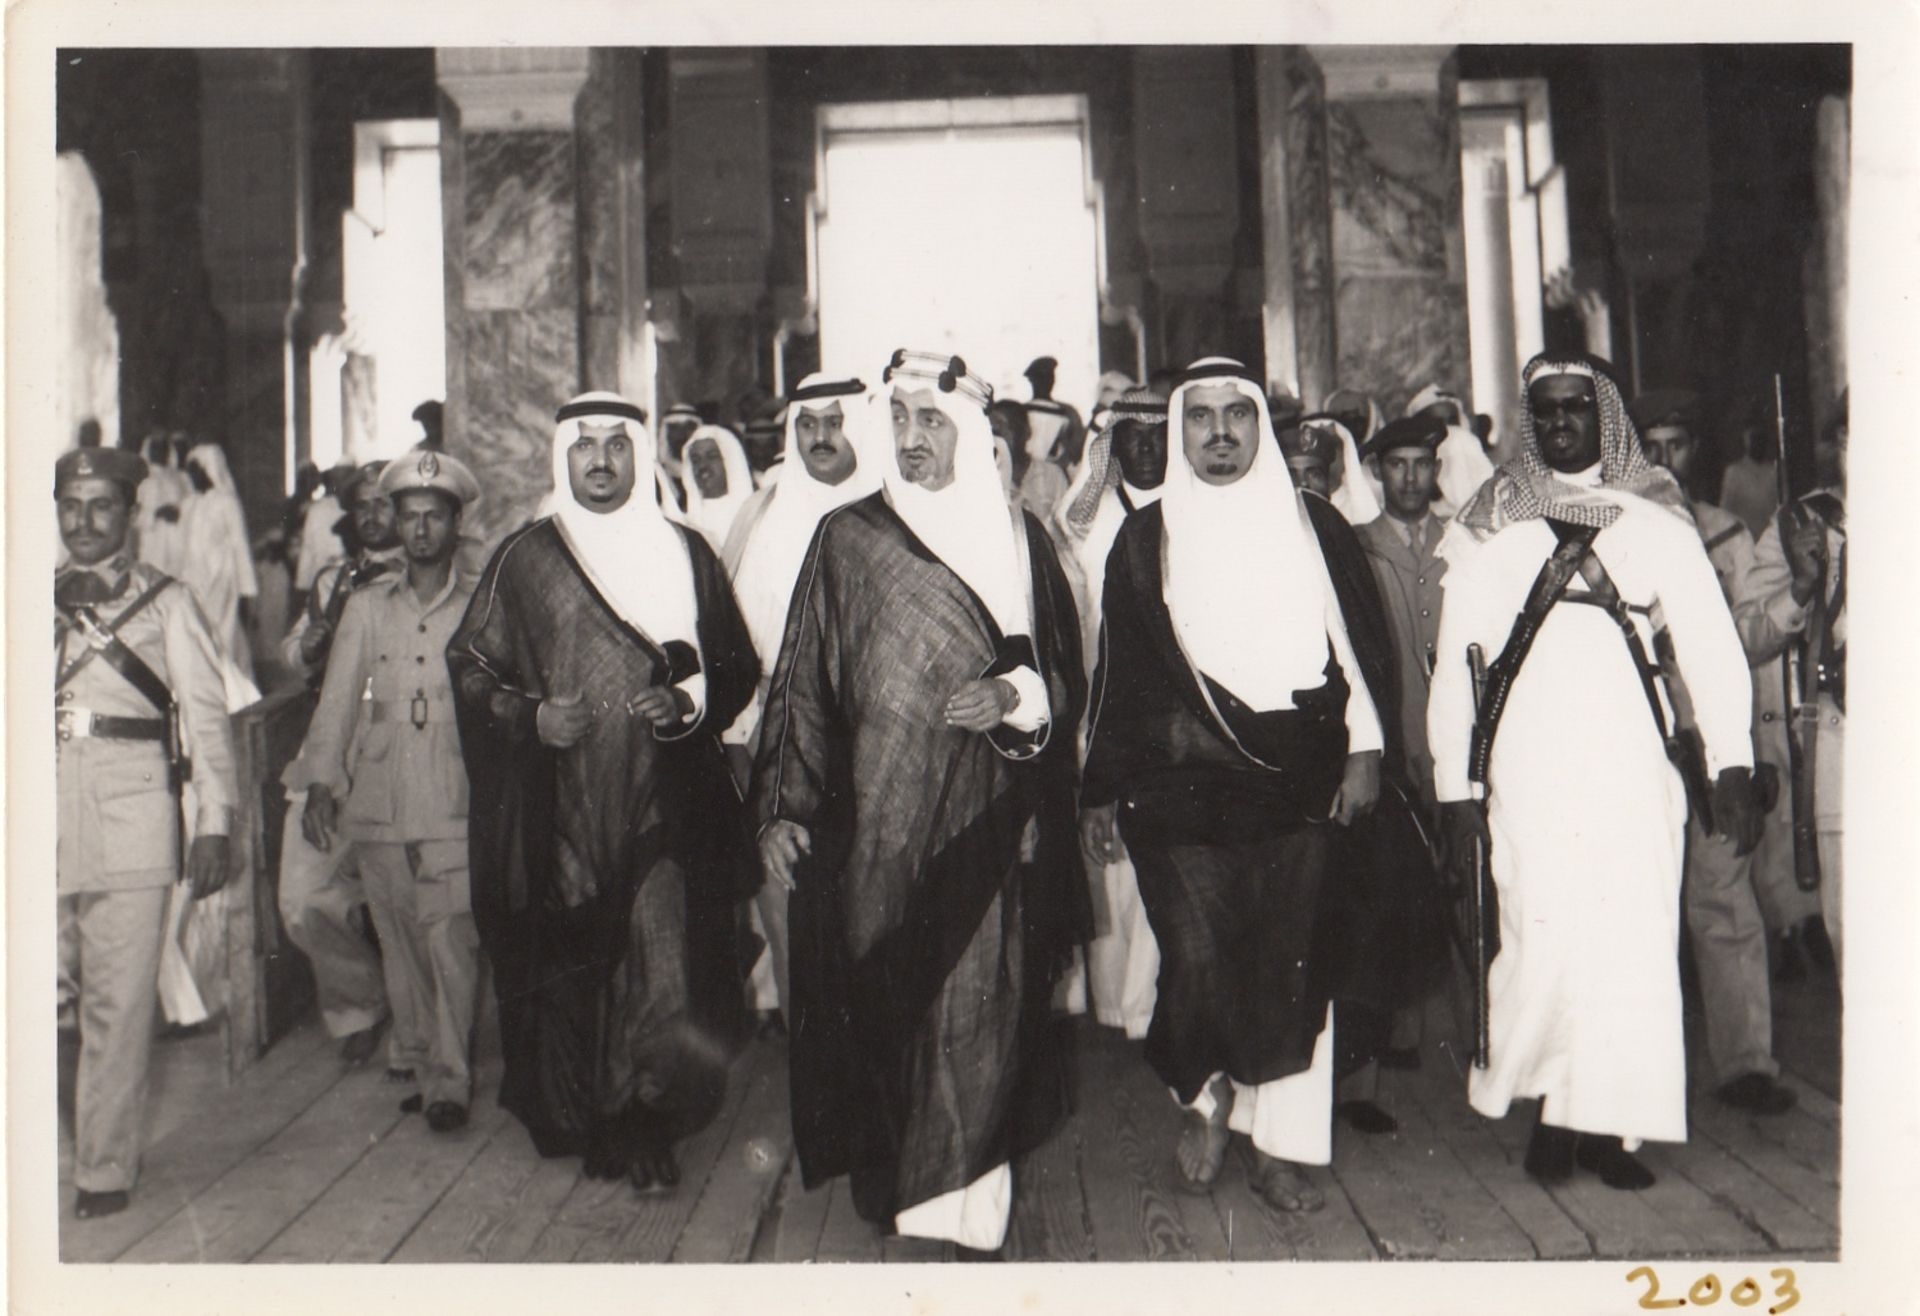 A COLLECTION OF PHOTOGRAPHS OF HIS MAJESTY KING FAISAL BIN ABDUL AZIZ VISITING THE GRAND MOSQUES OF - Image 2 of 24